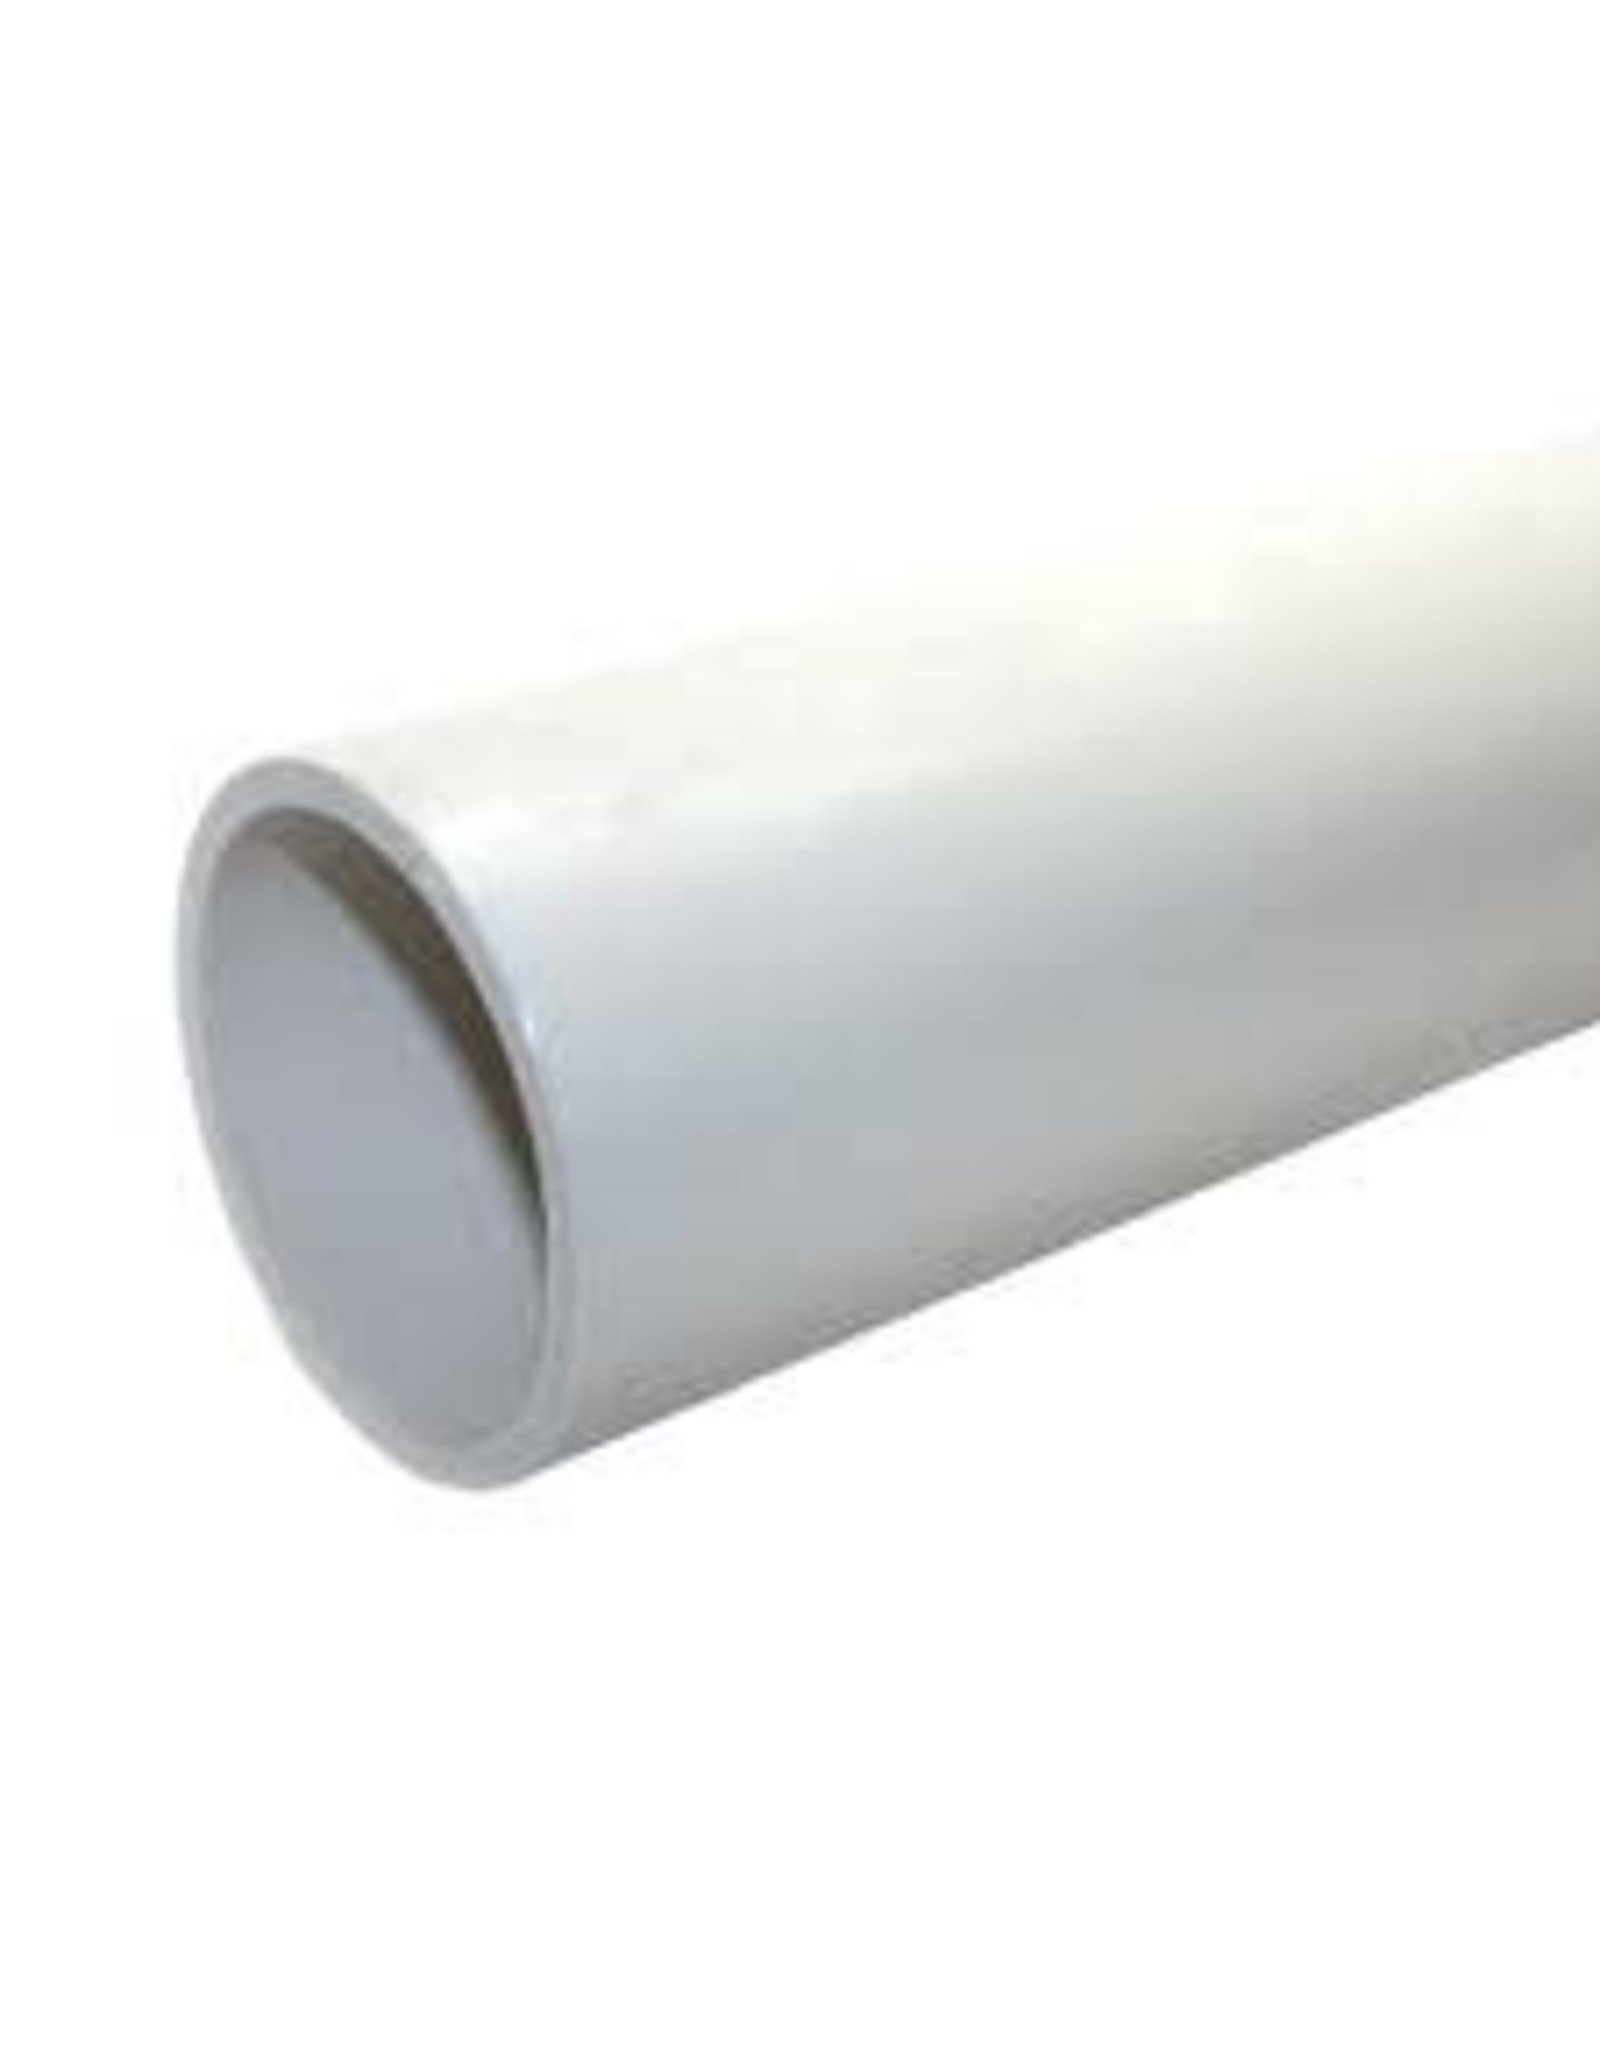 Cell Core PVC Pipe